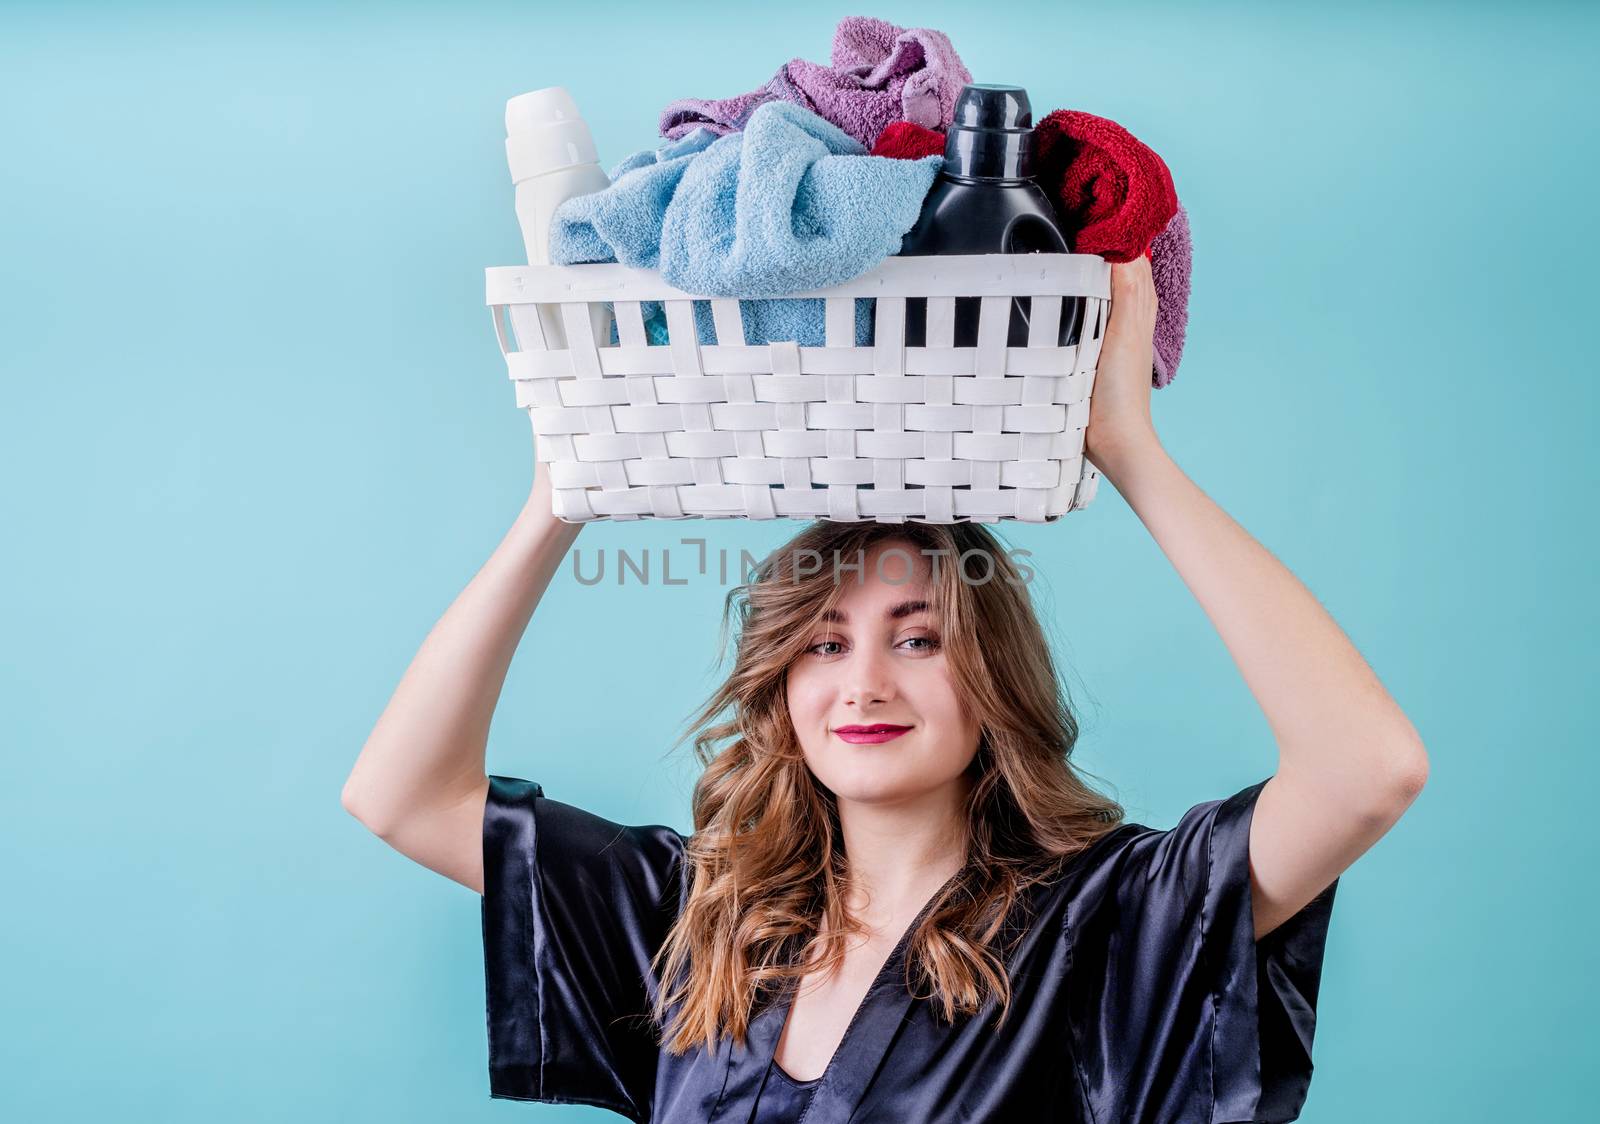 Laundry concept. Happy housewife holding a basket of clothes ready for laundry on her head isolated on blue background with copy space